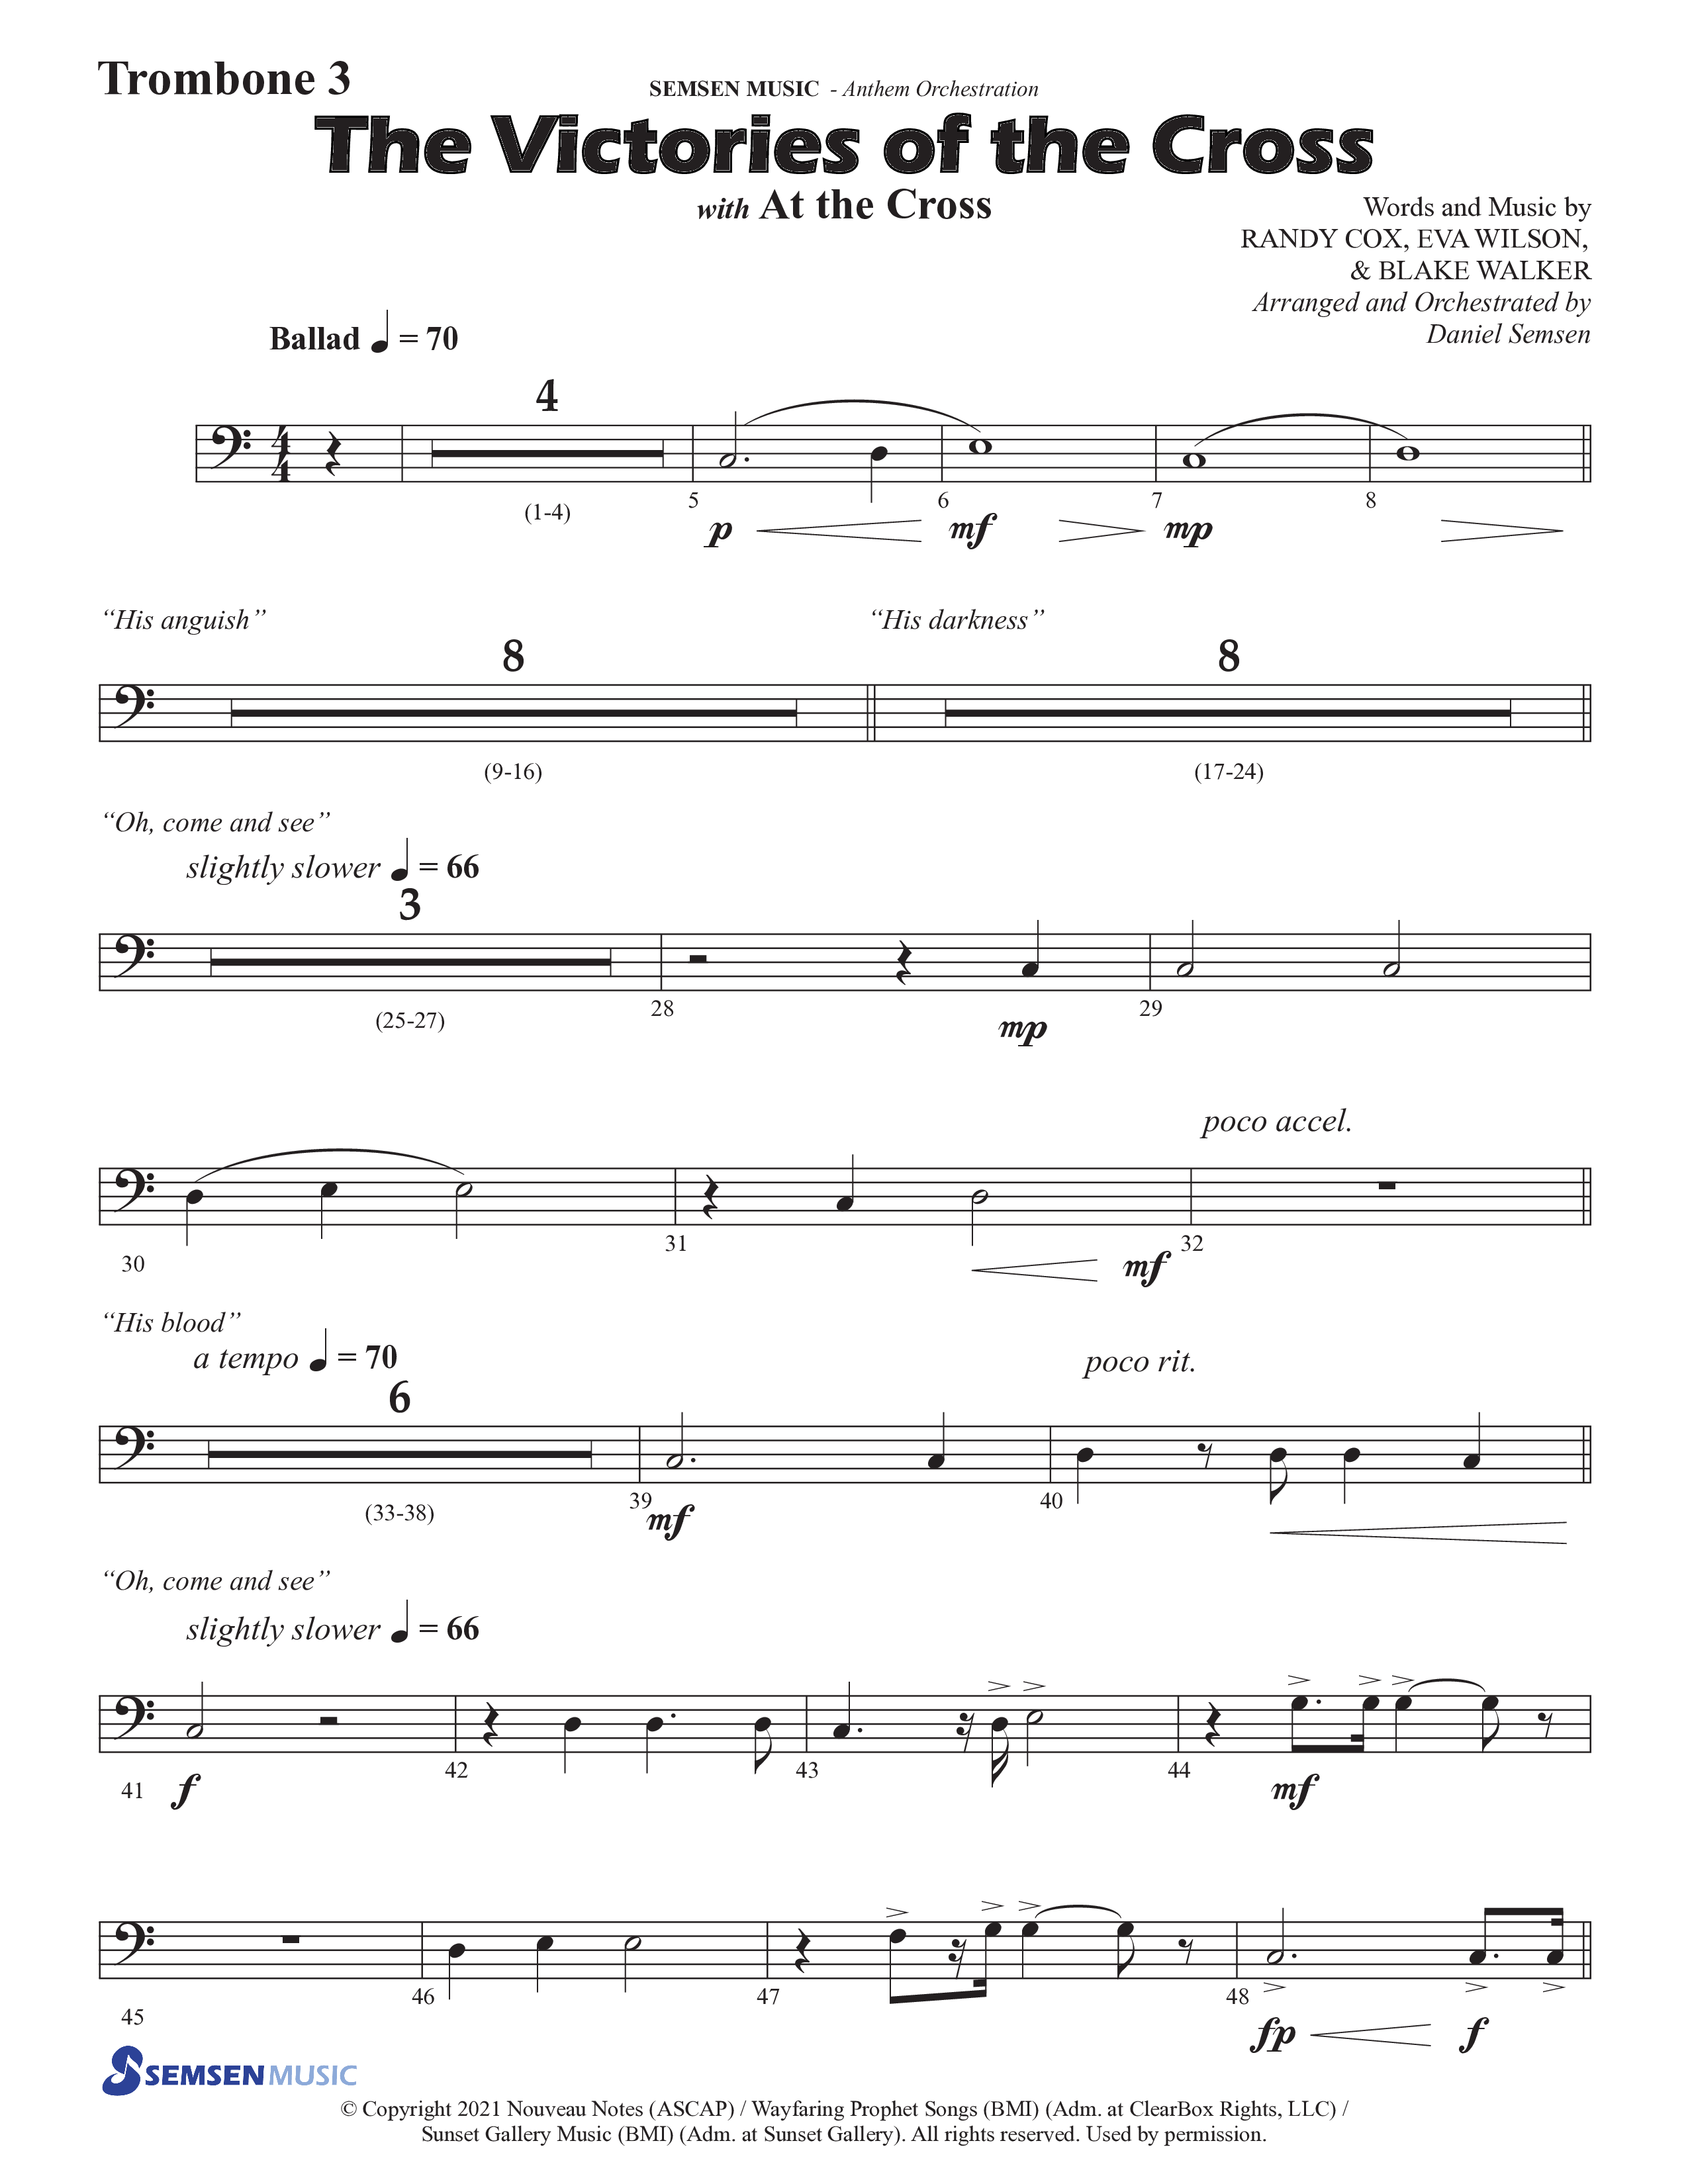 The Victories Of The Cross (with At The Cross) (Choral Anthem SATB) Trombone 3 (Semsen Music / Arr. Daniel Semsen)